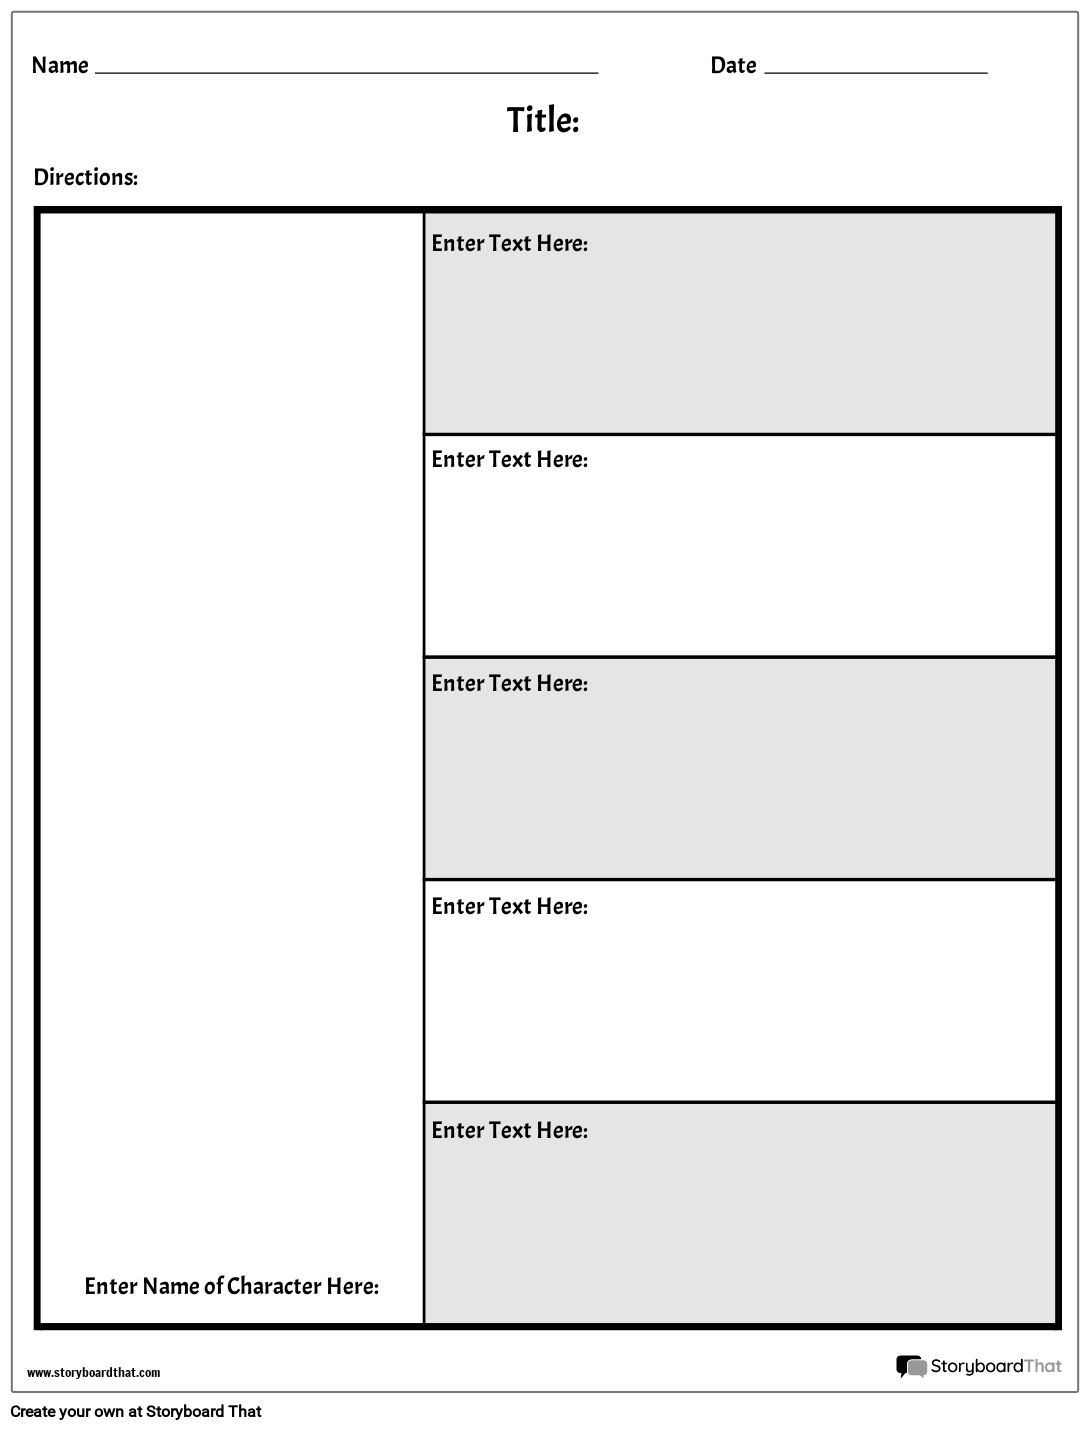 Simple 5 Questions Character Map Worksheet Template